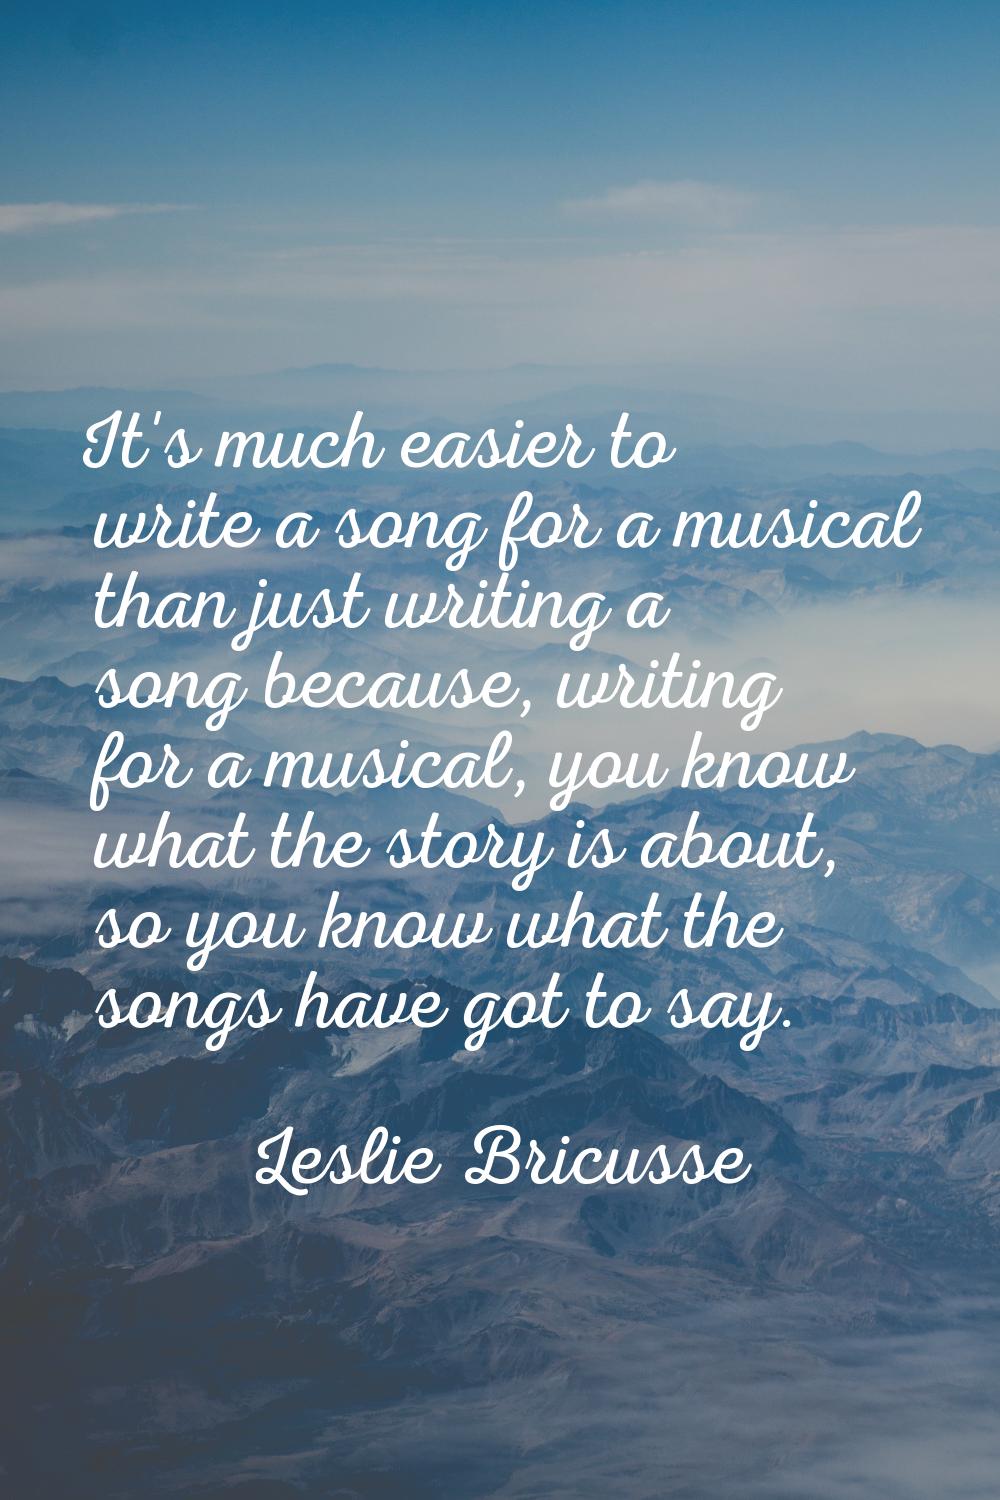 It's much easier to write a song for a musical than just writing a song because, writing for a musi